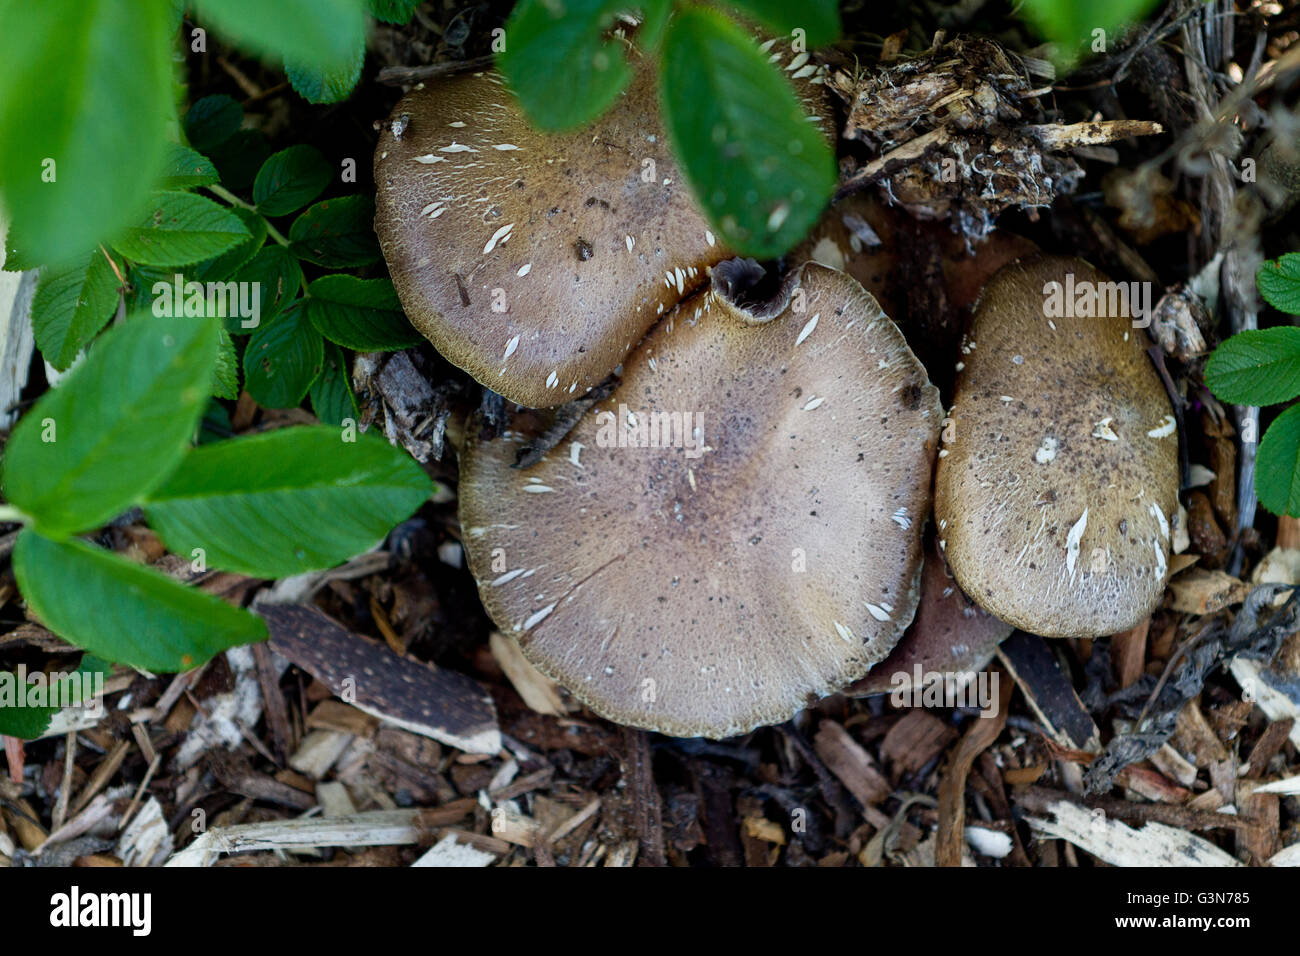 Mushrooms Growing In The Garden Surrounded By Green Plants And